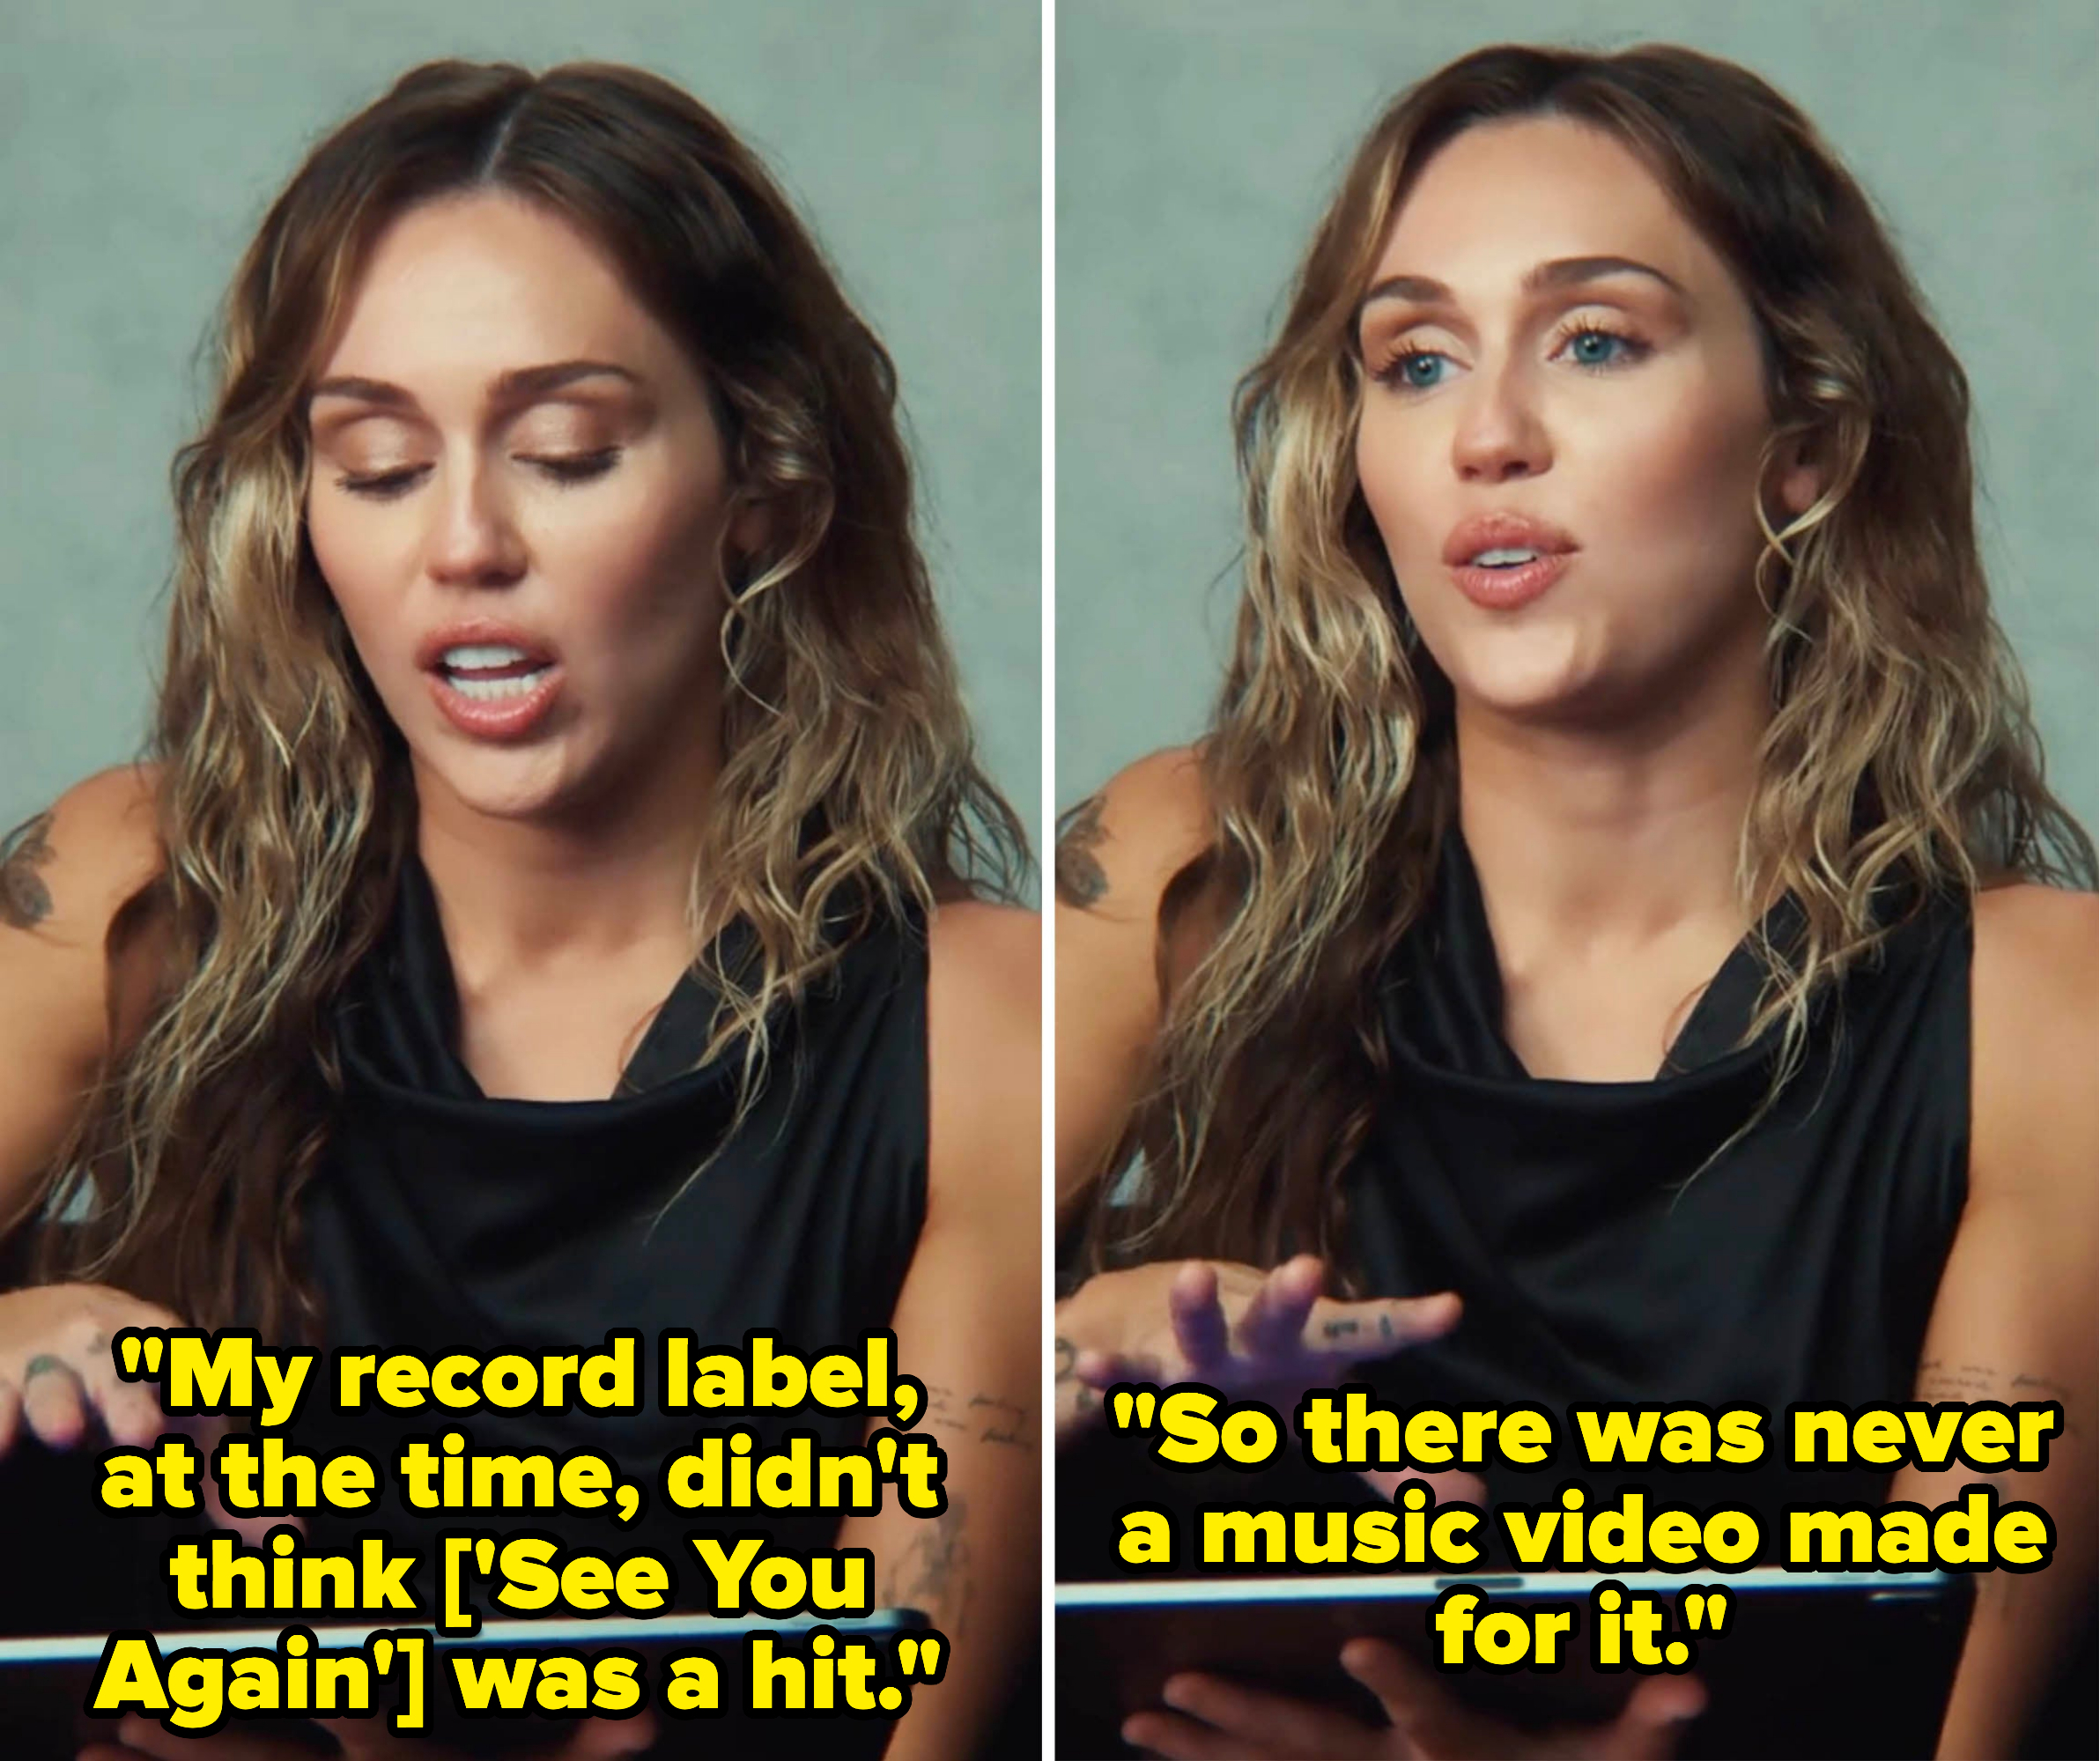 Miley talking about how her record label at the time did not thing the song &quot;See You Again&quot; was a hit so there a music video was never made